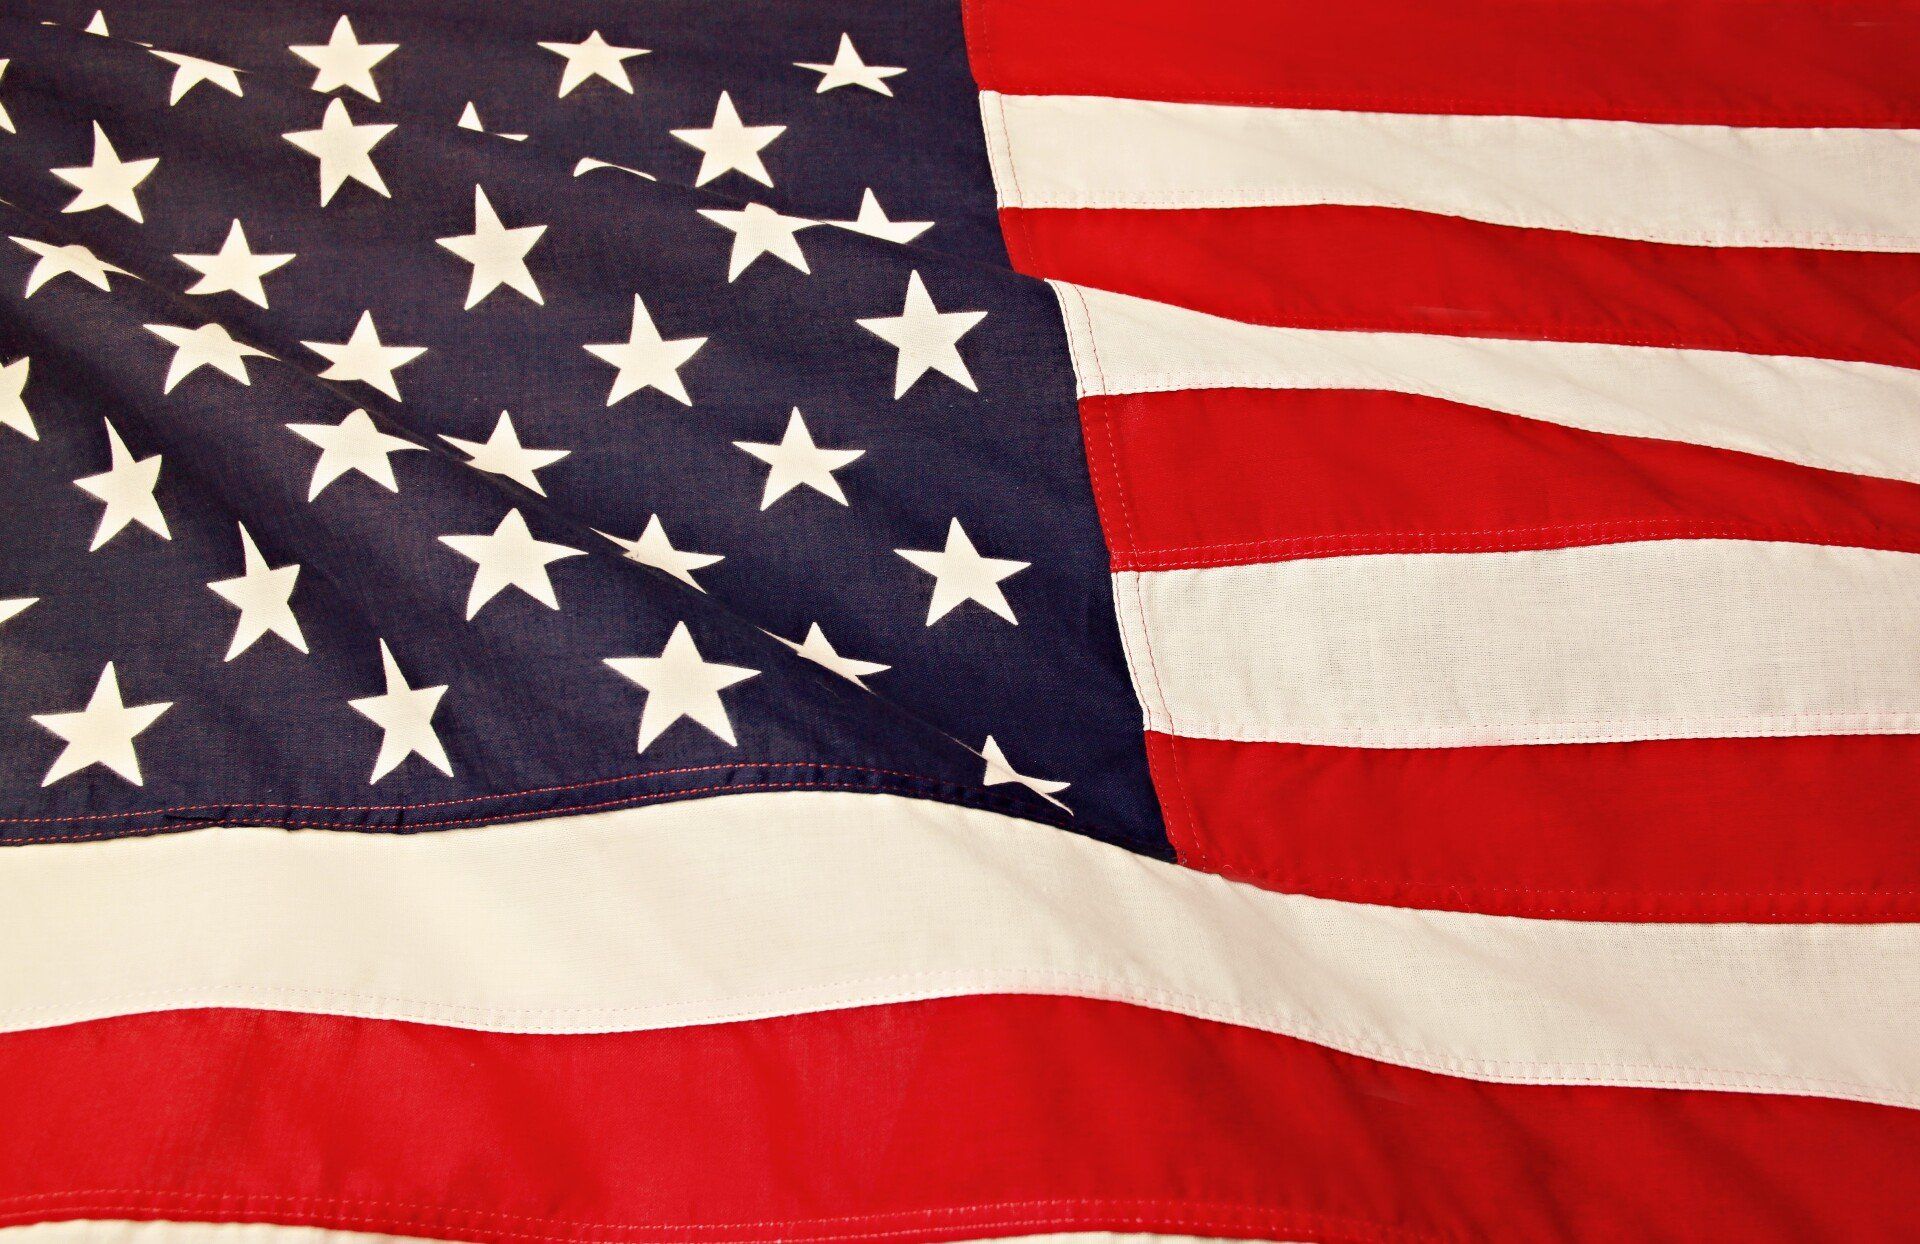 A close up of an american flag with stars and stripes